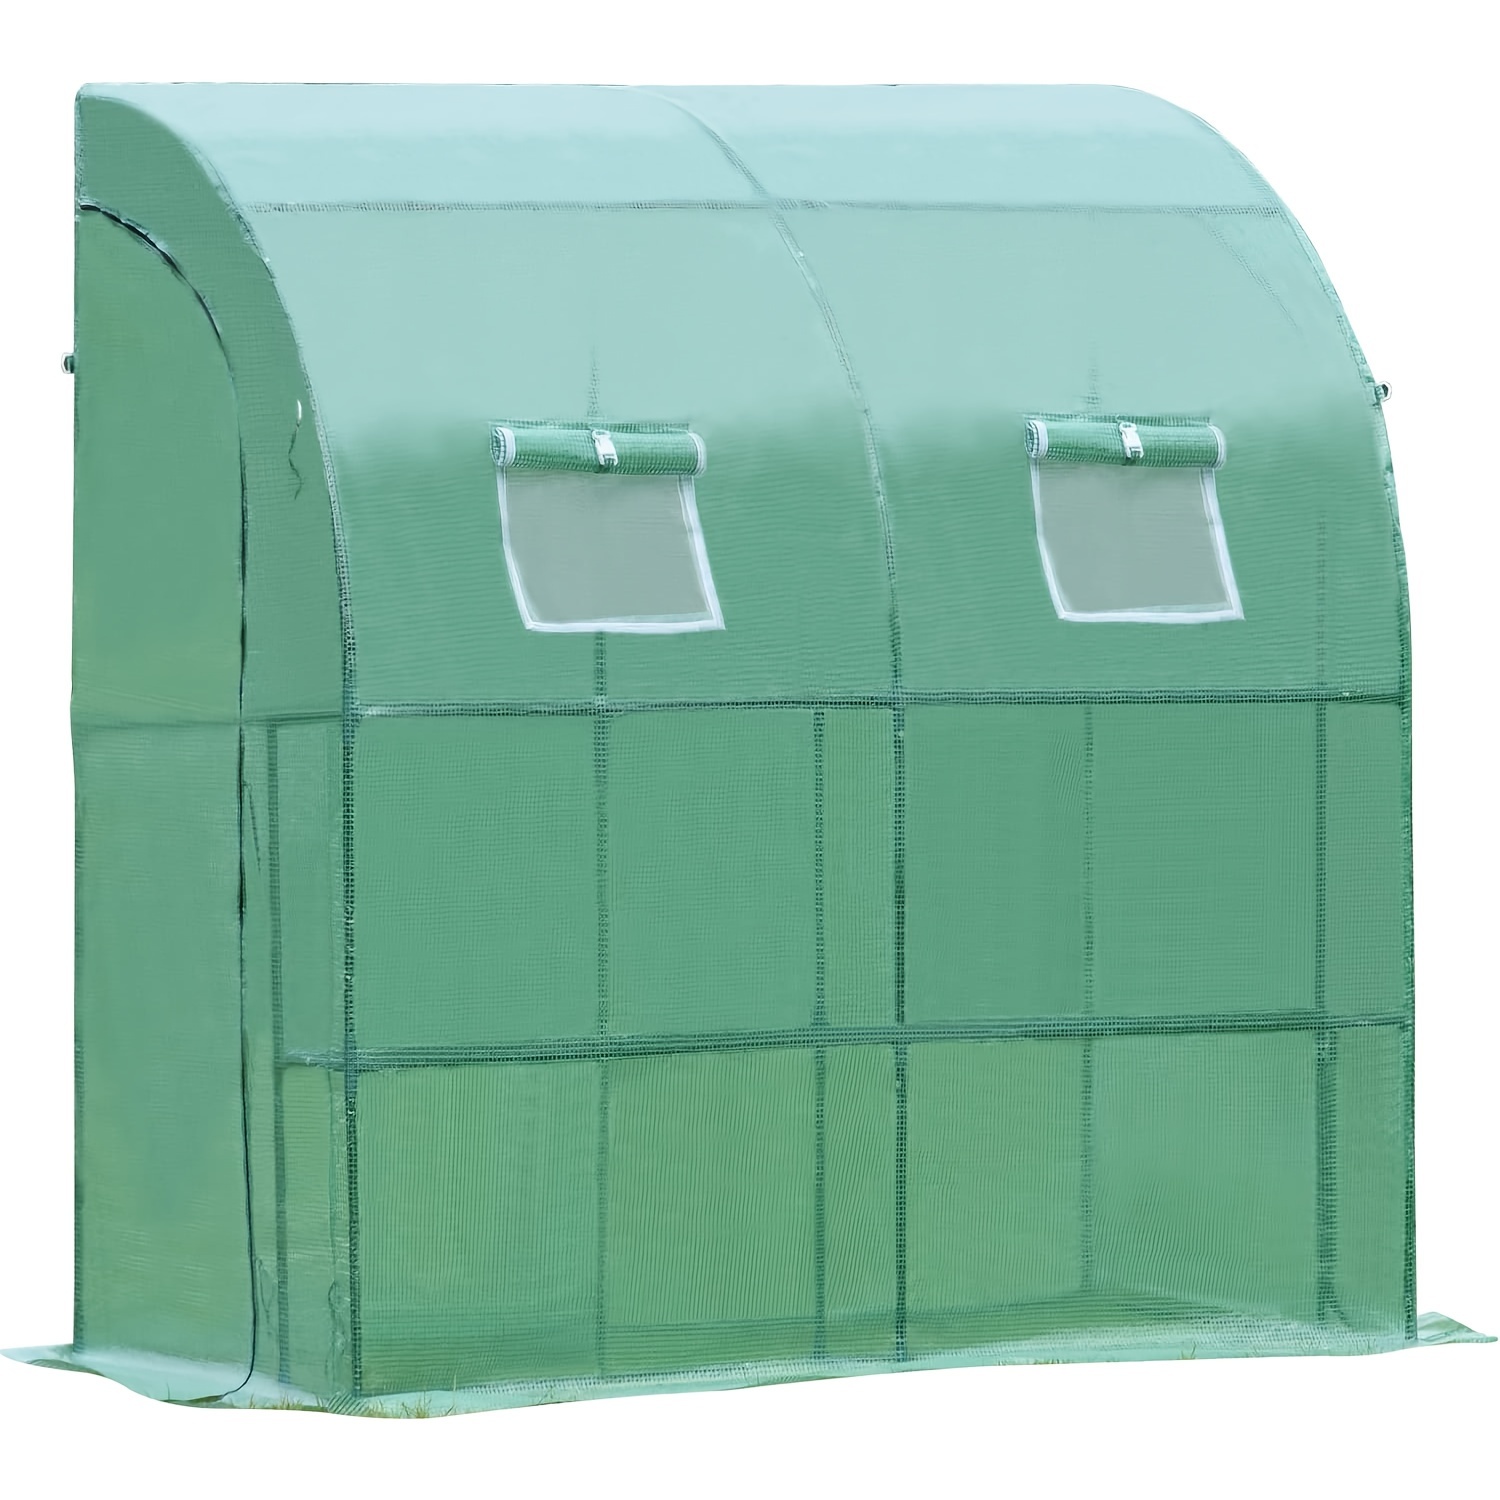 

6.7' X 3.3' X 7.2' Lean-to Walk-in Greenhouse With Shelf And Durable Pe Cover - Green